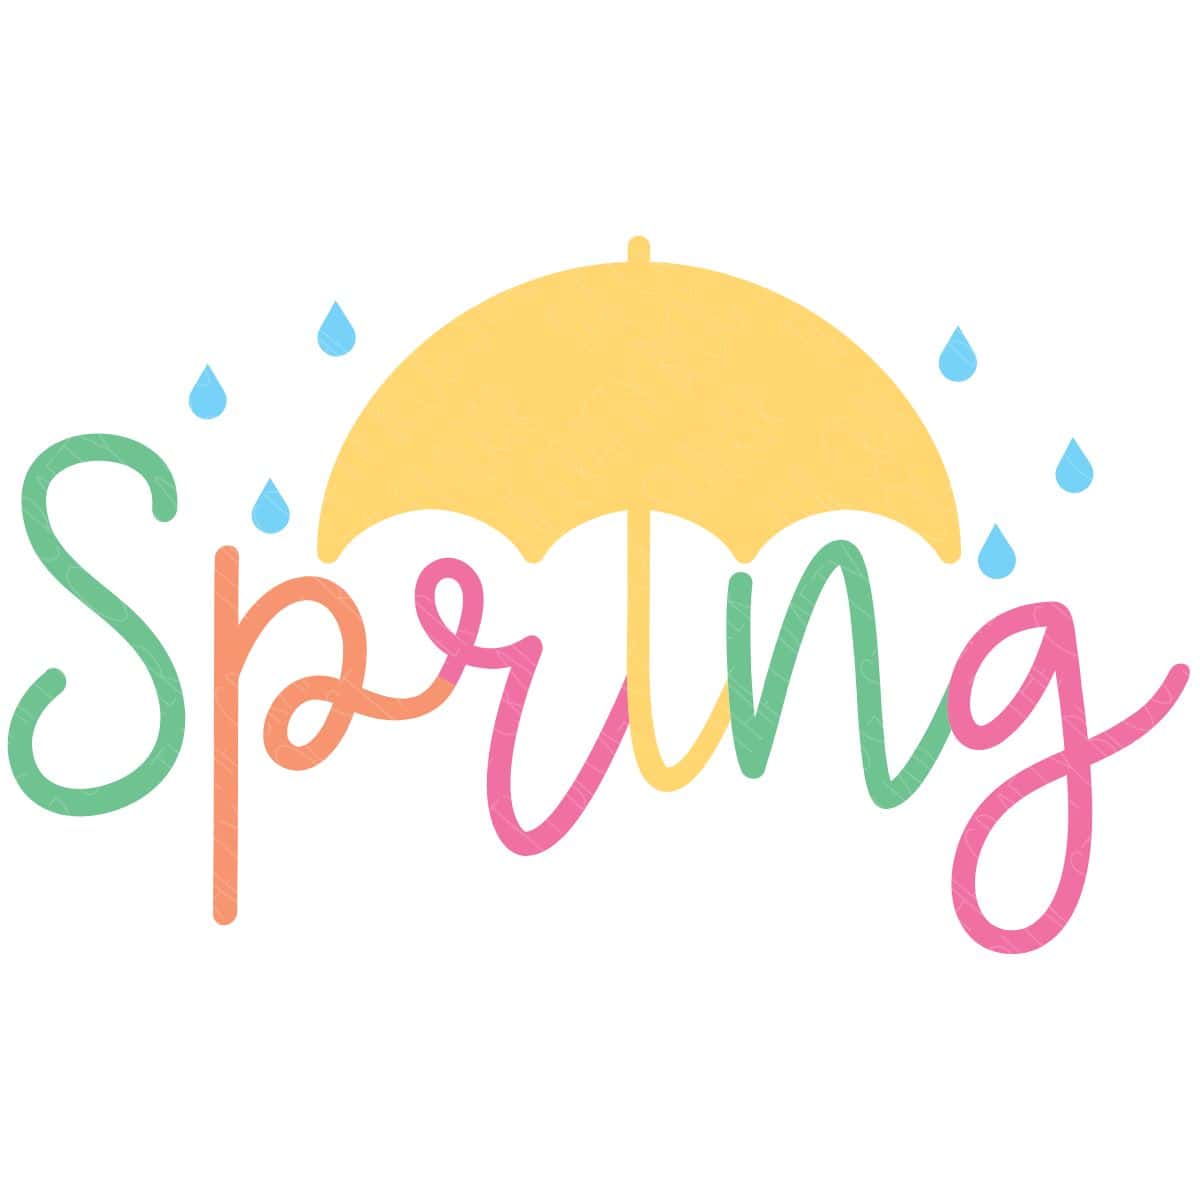 Layered SVG Cut File: Spring with an umbrella and raindrops.